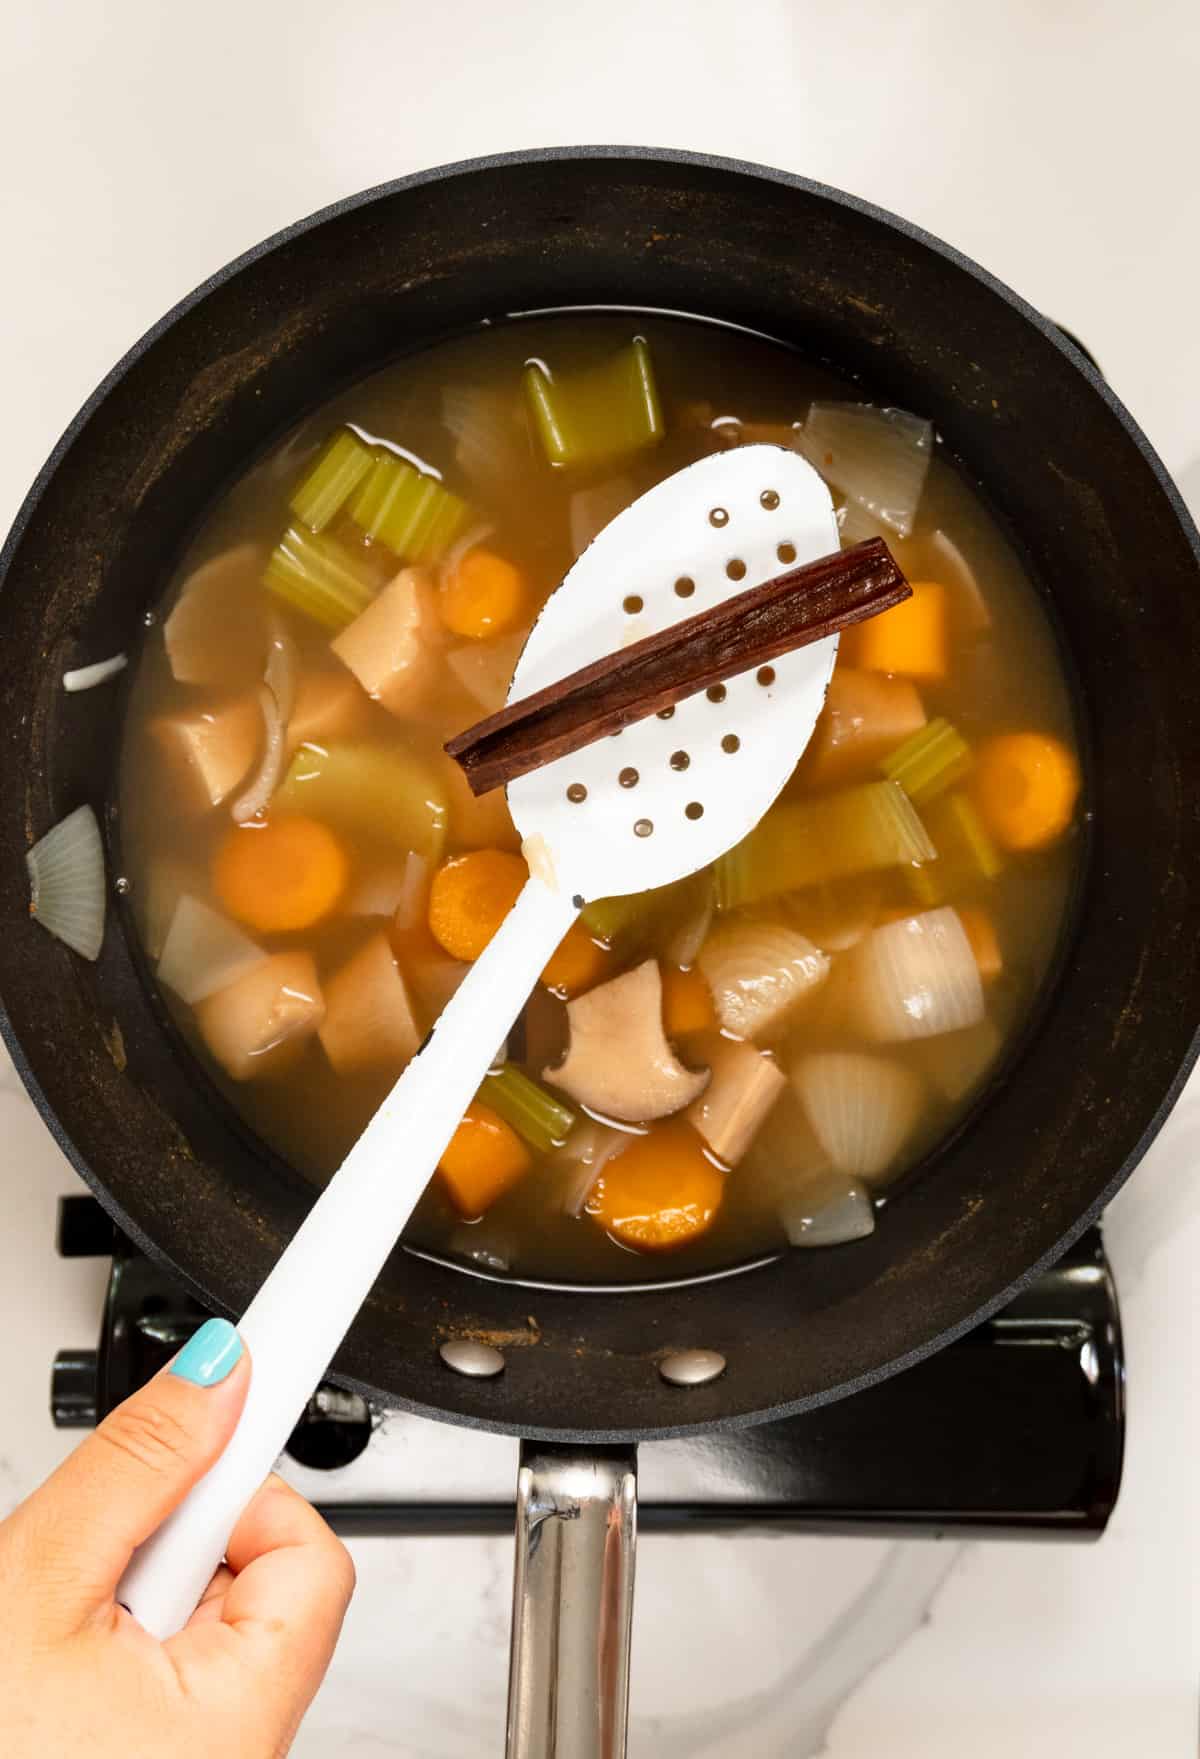 a black pot filled with cooked vegetables and water, with a white slotted spoon holding a cooked cinnamon quill